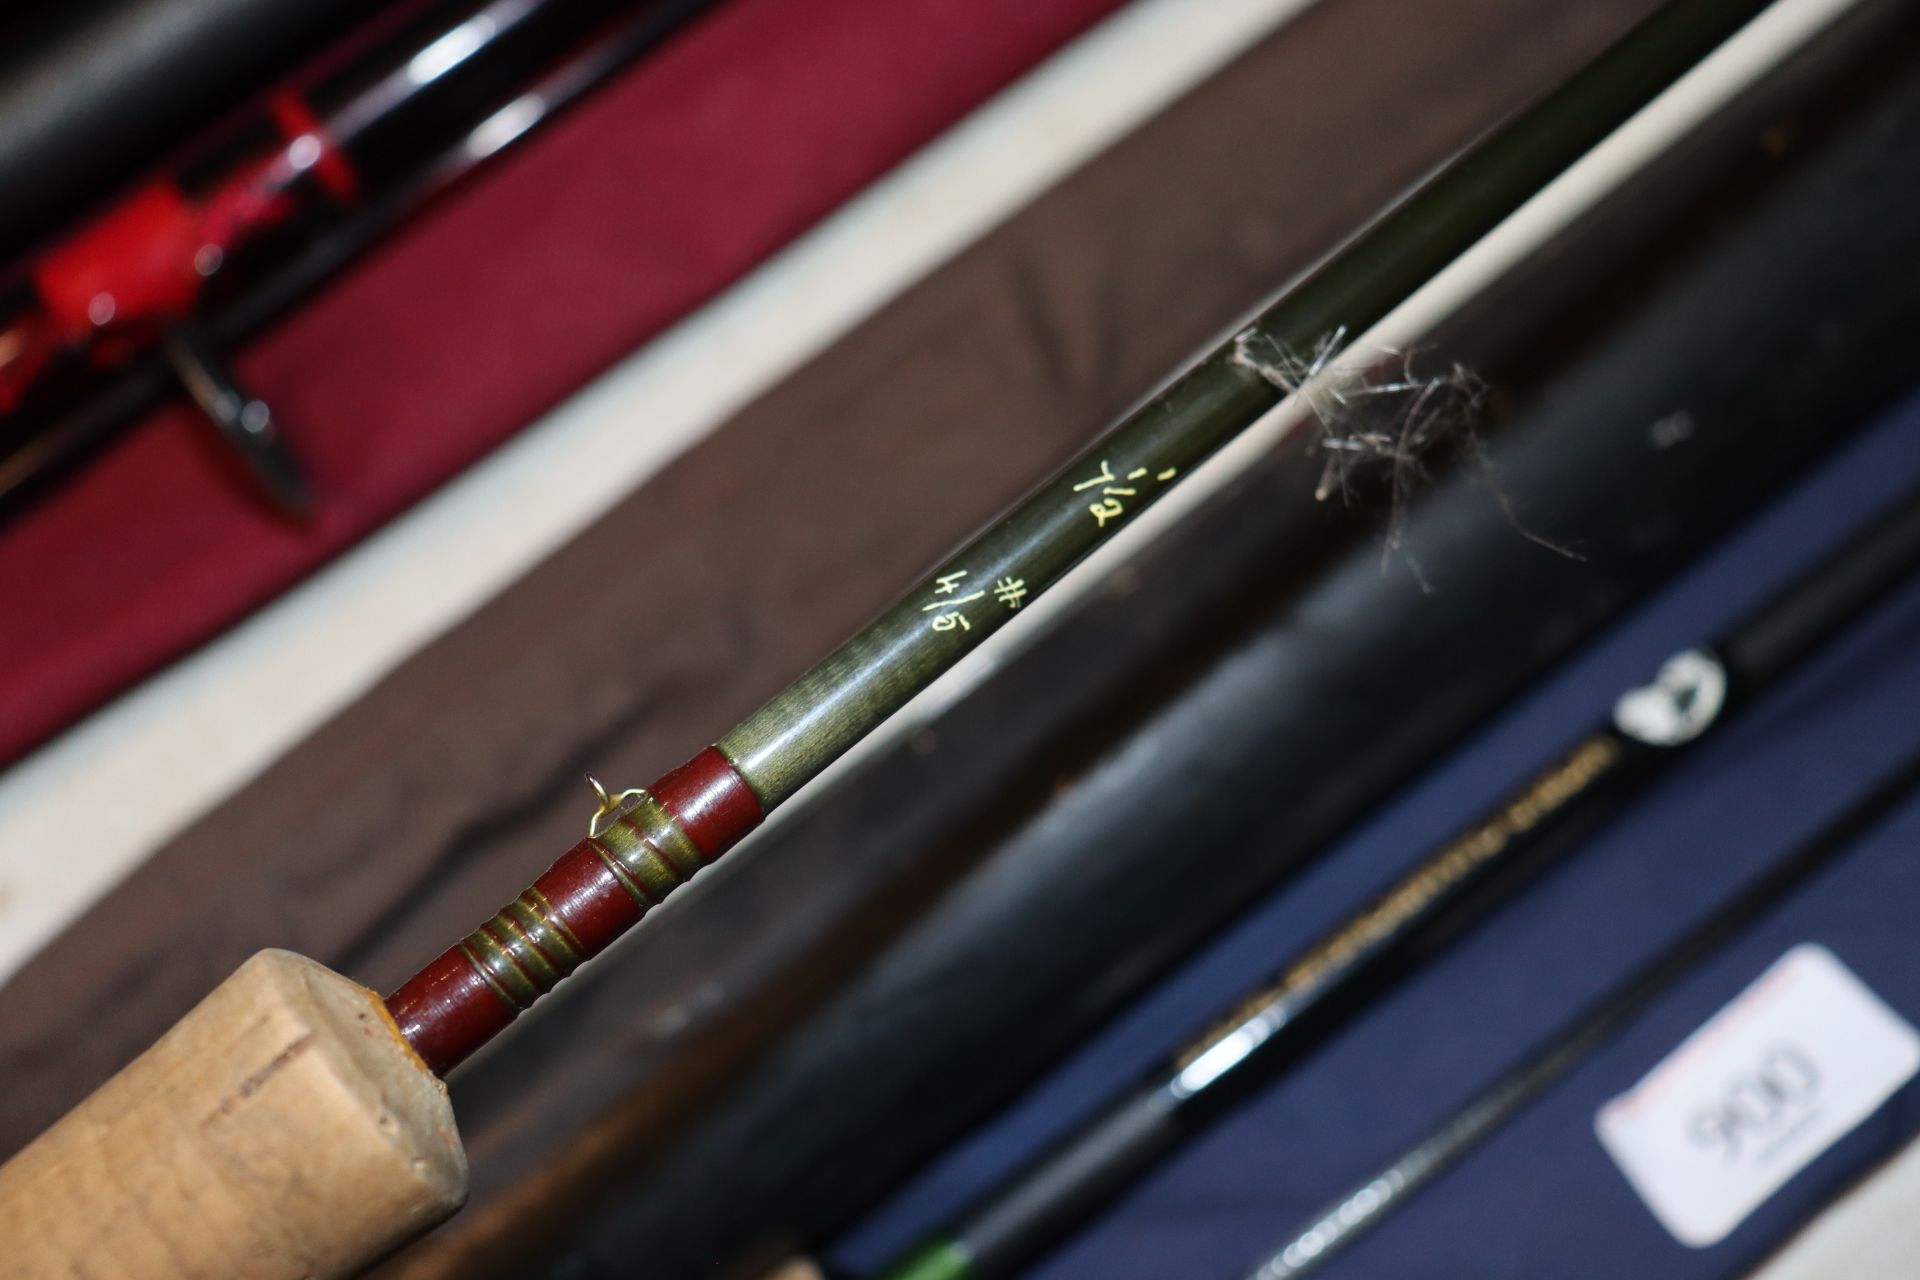 Two fly fishing rods with cloth bags - Image 3 of 3